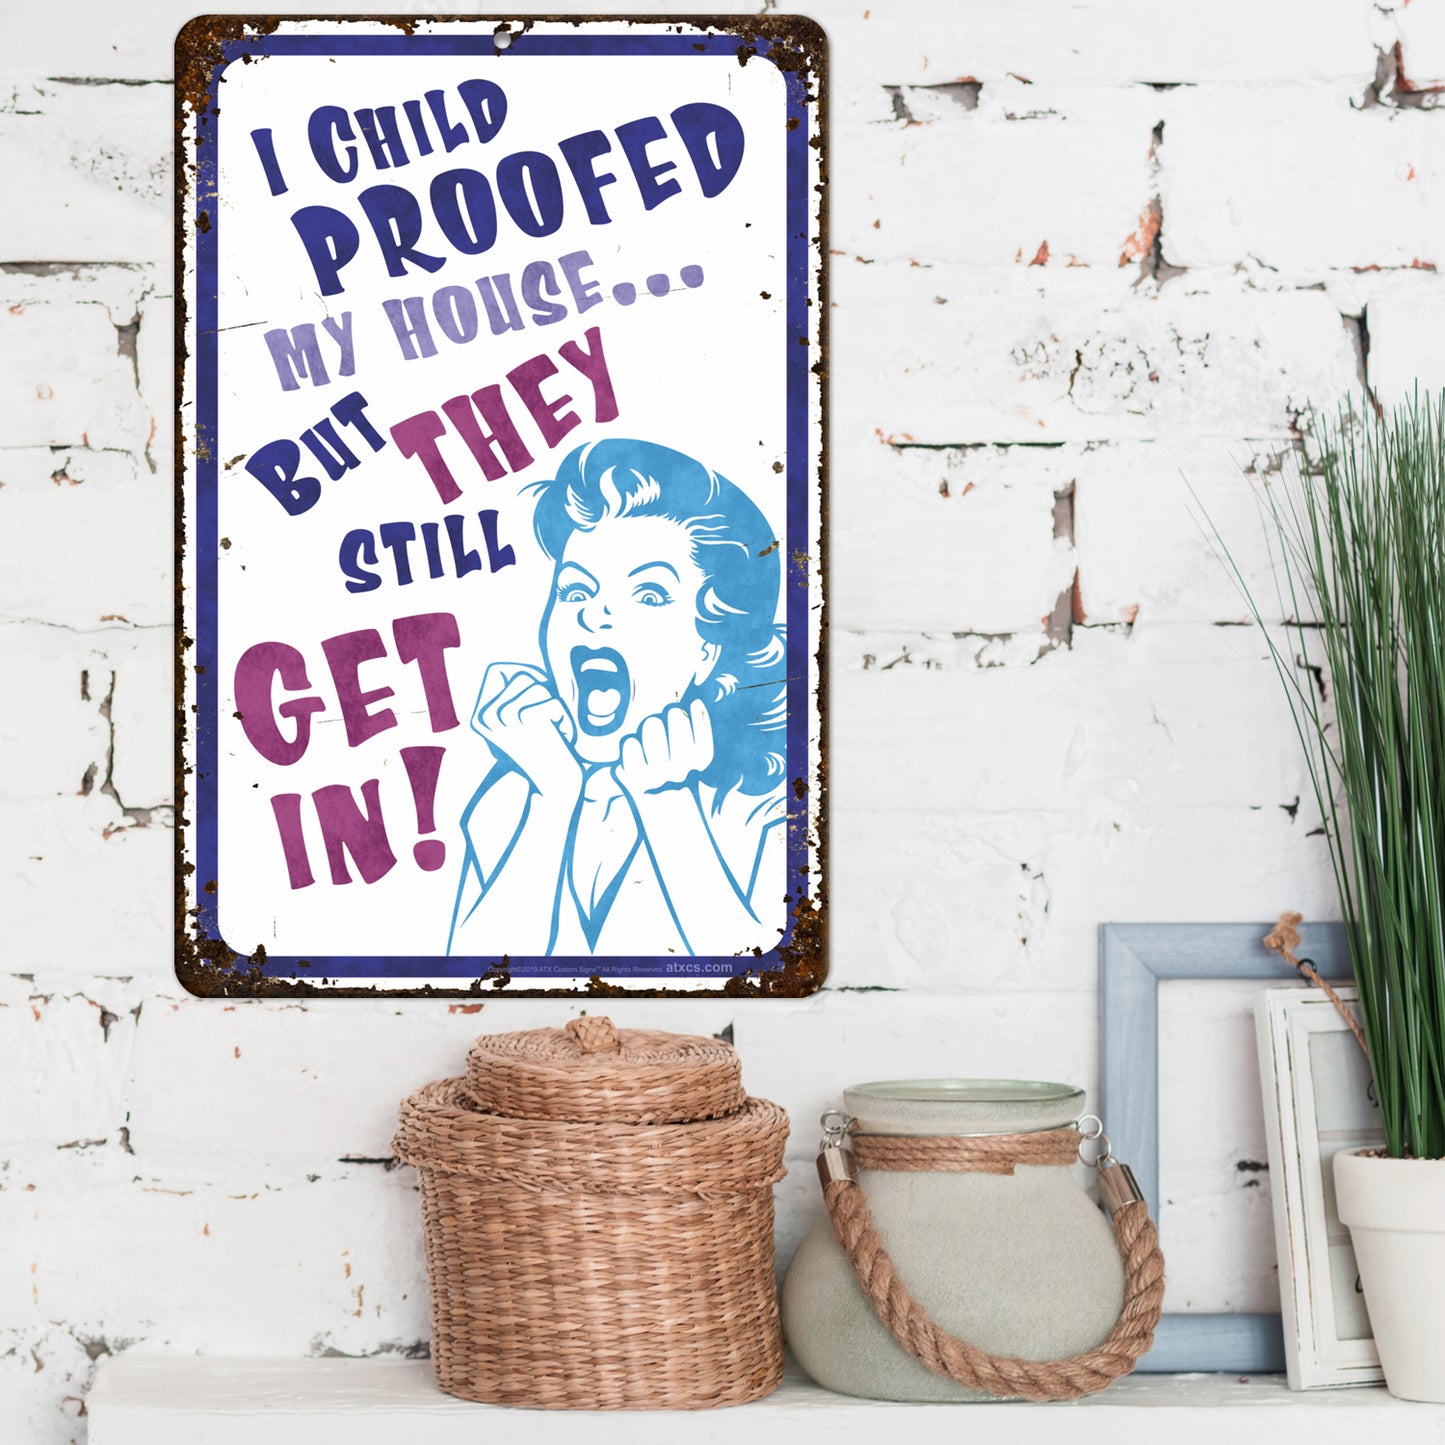 Funny Metal Sign - I Child Proofed My House. but They Still get in! (Antique Design) - Size 8 x 12